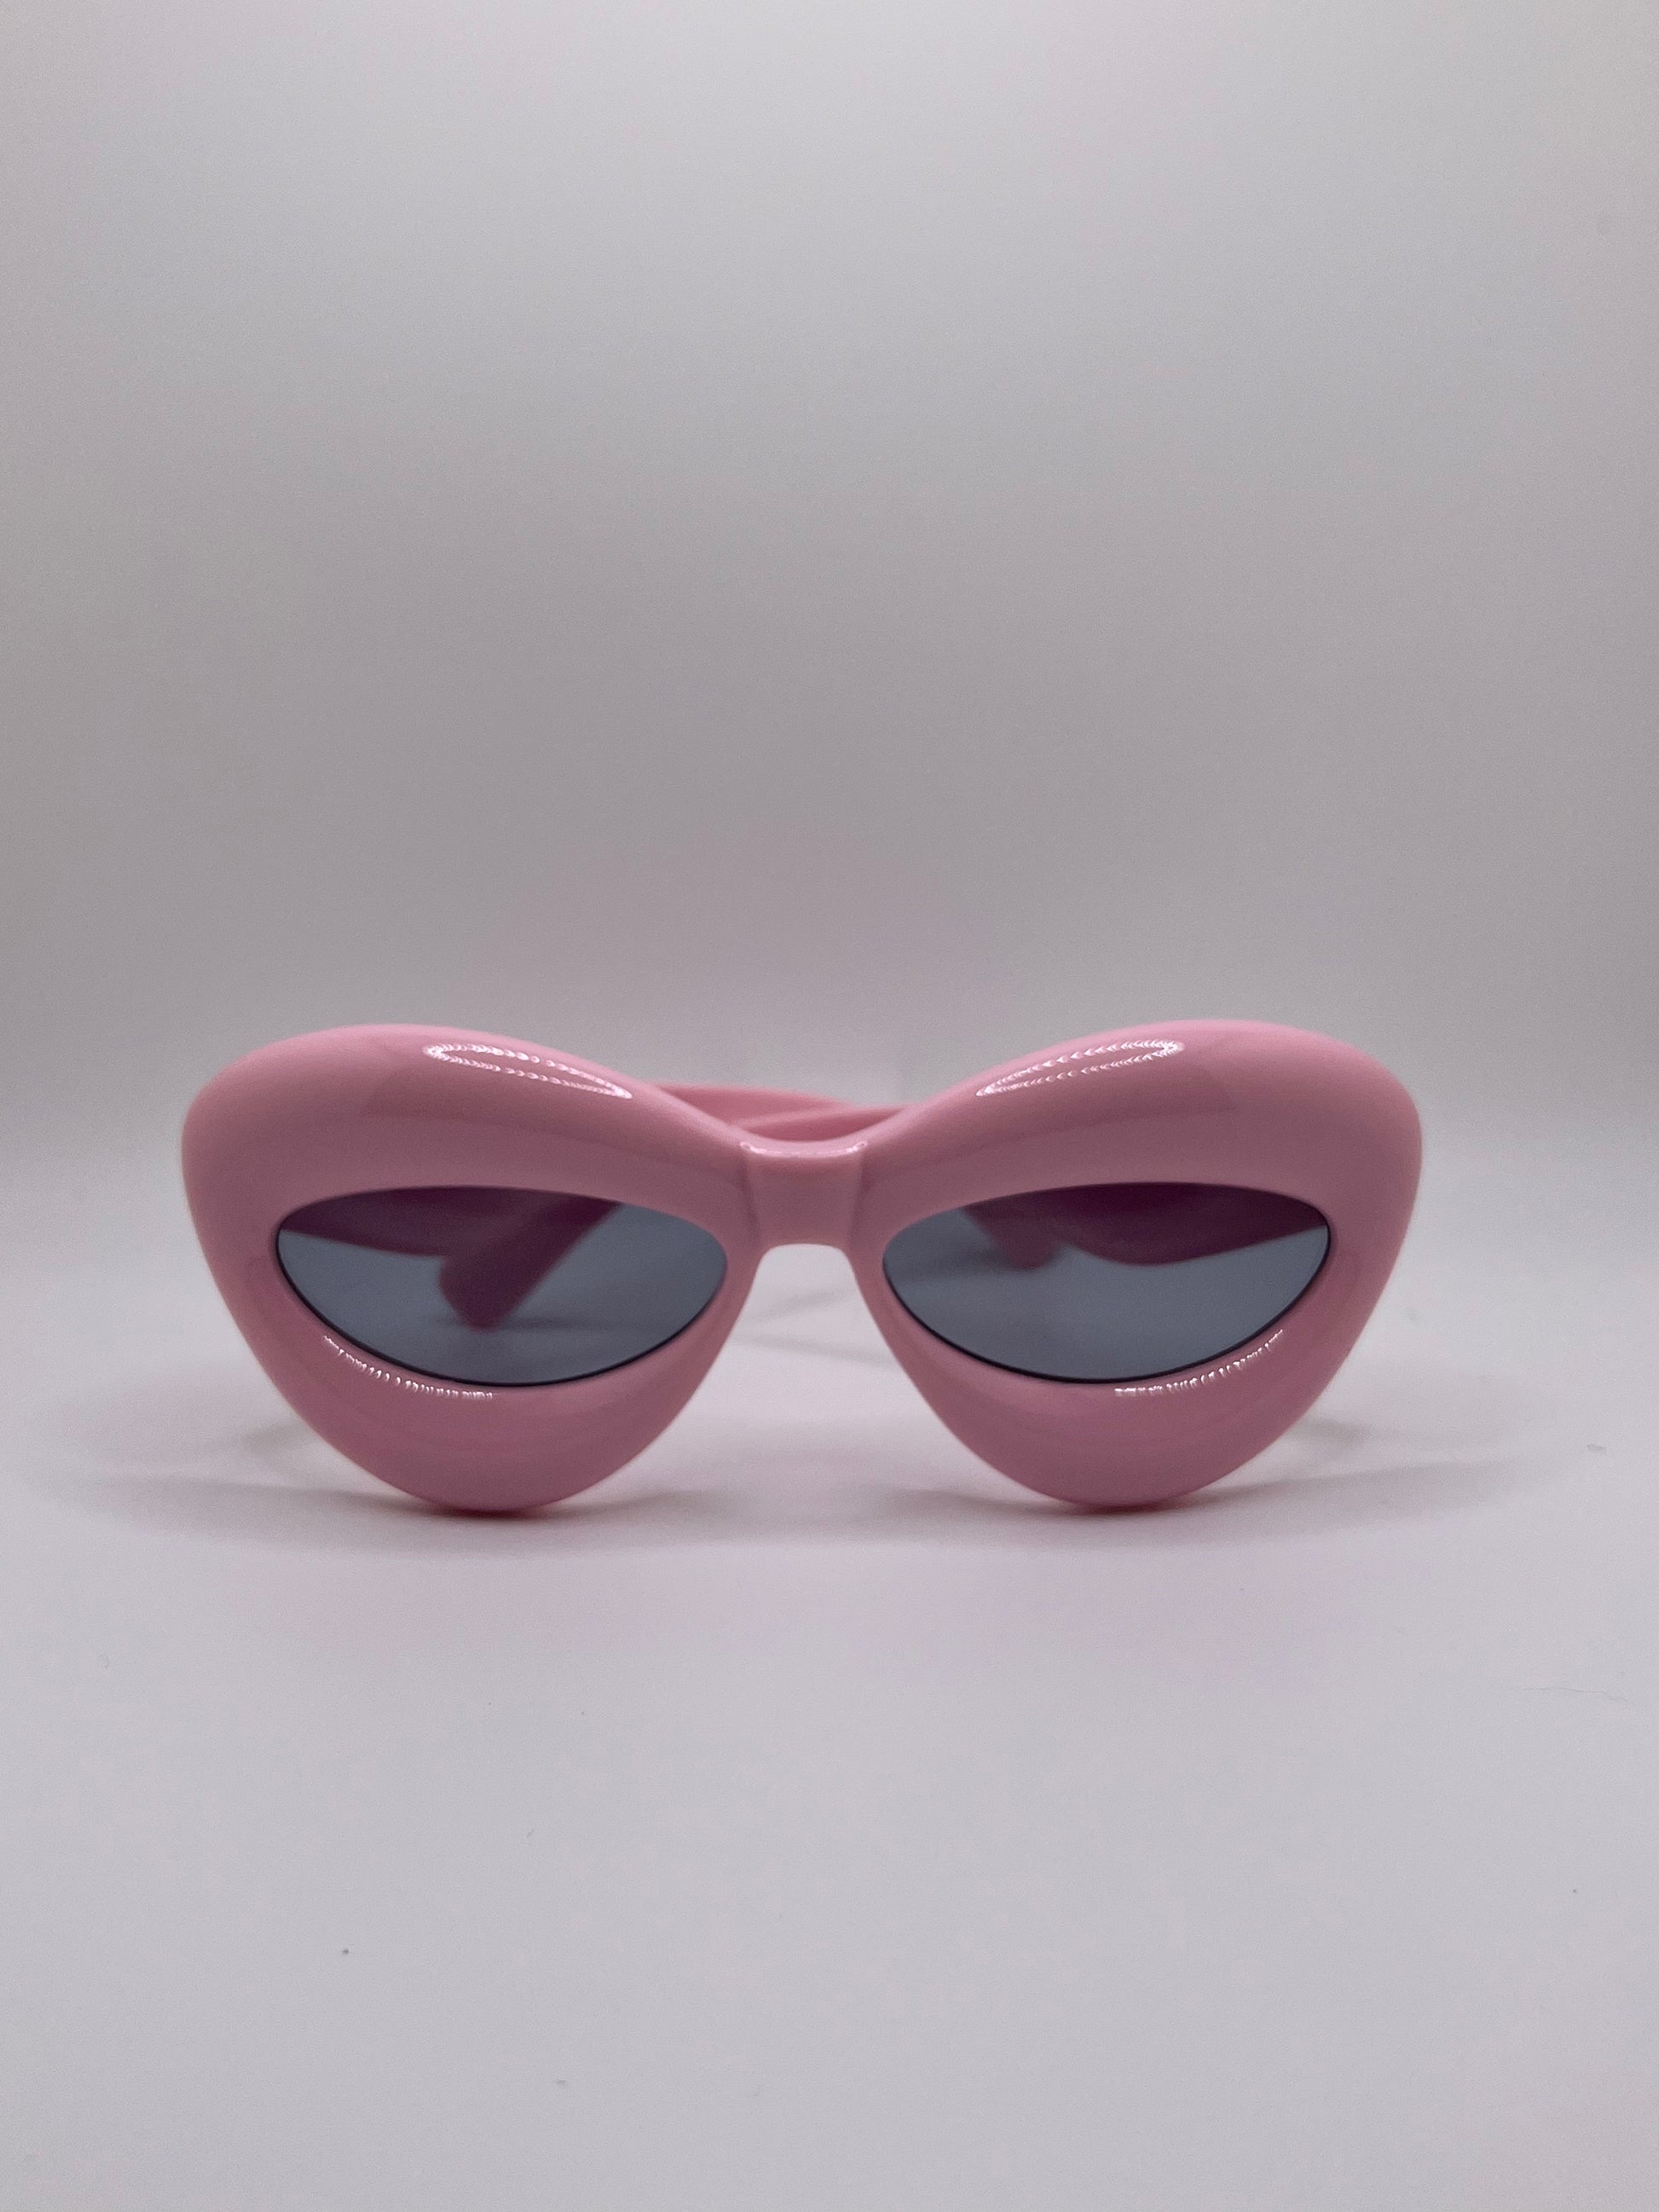 These inflated sunglasses in pink are giving effortless icon. Try them in every color and add a splash of extra to any outfit. These work for formal events or a day of errands and will make you feel glam every step of the way.